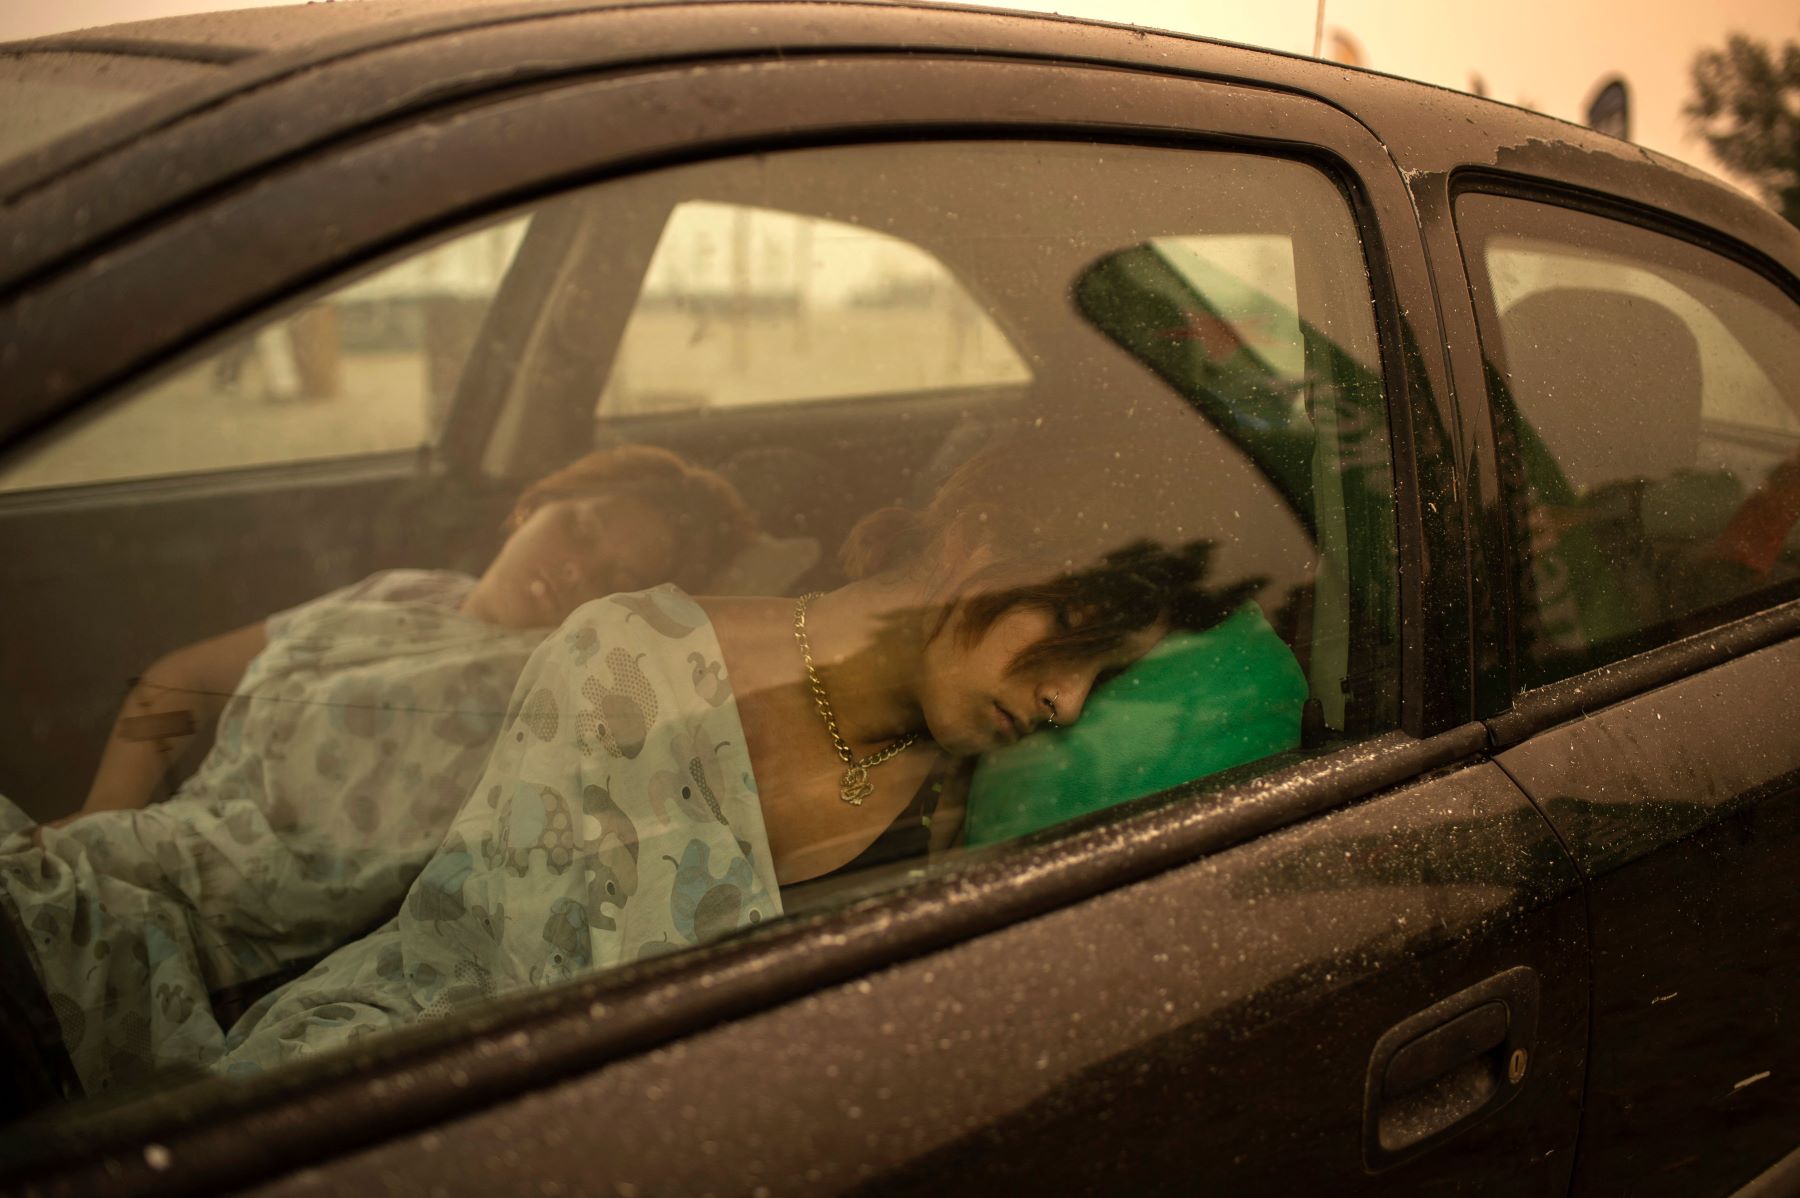 A woman and child sleeping in a car in the Pefki village of Euboea, Italy